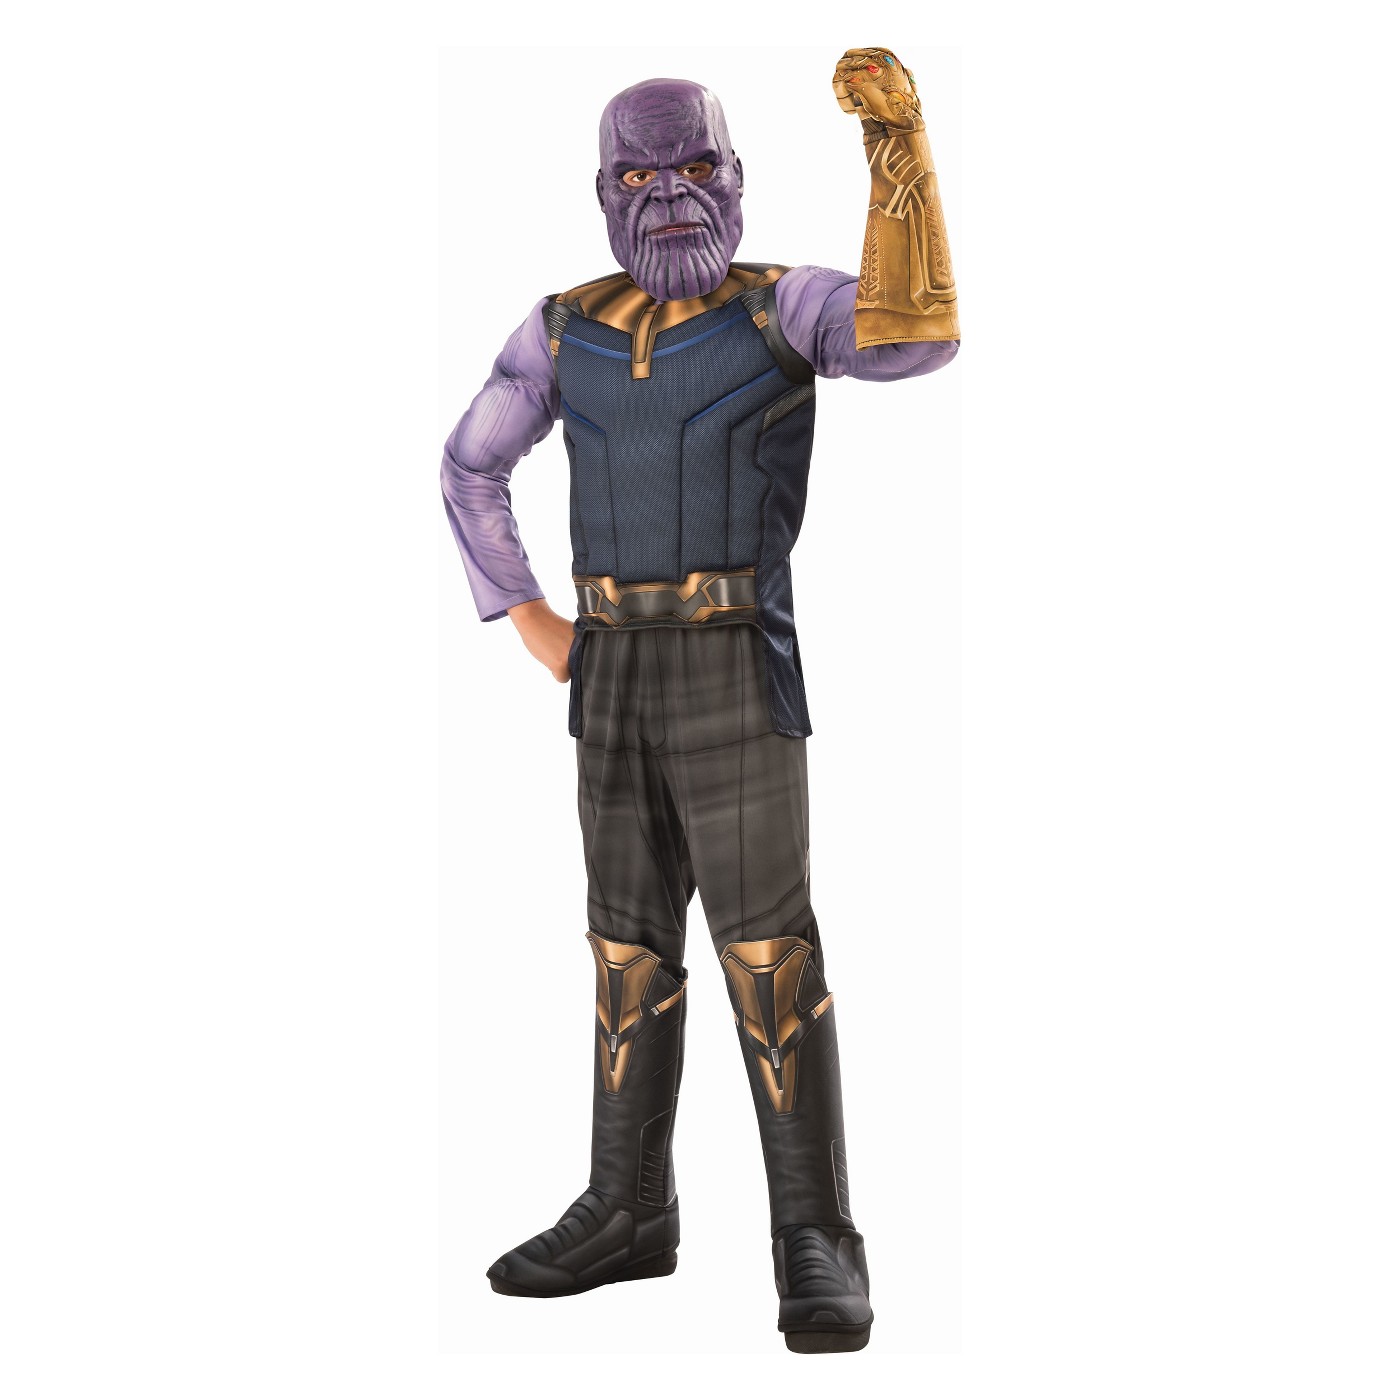 Boys' Marvel Thanos Avengers Deluxe Muscle Halloween Costume - image 1 of 1